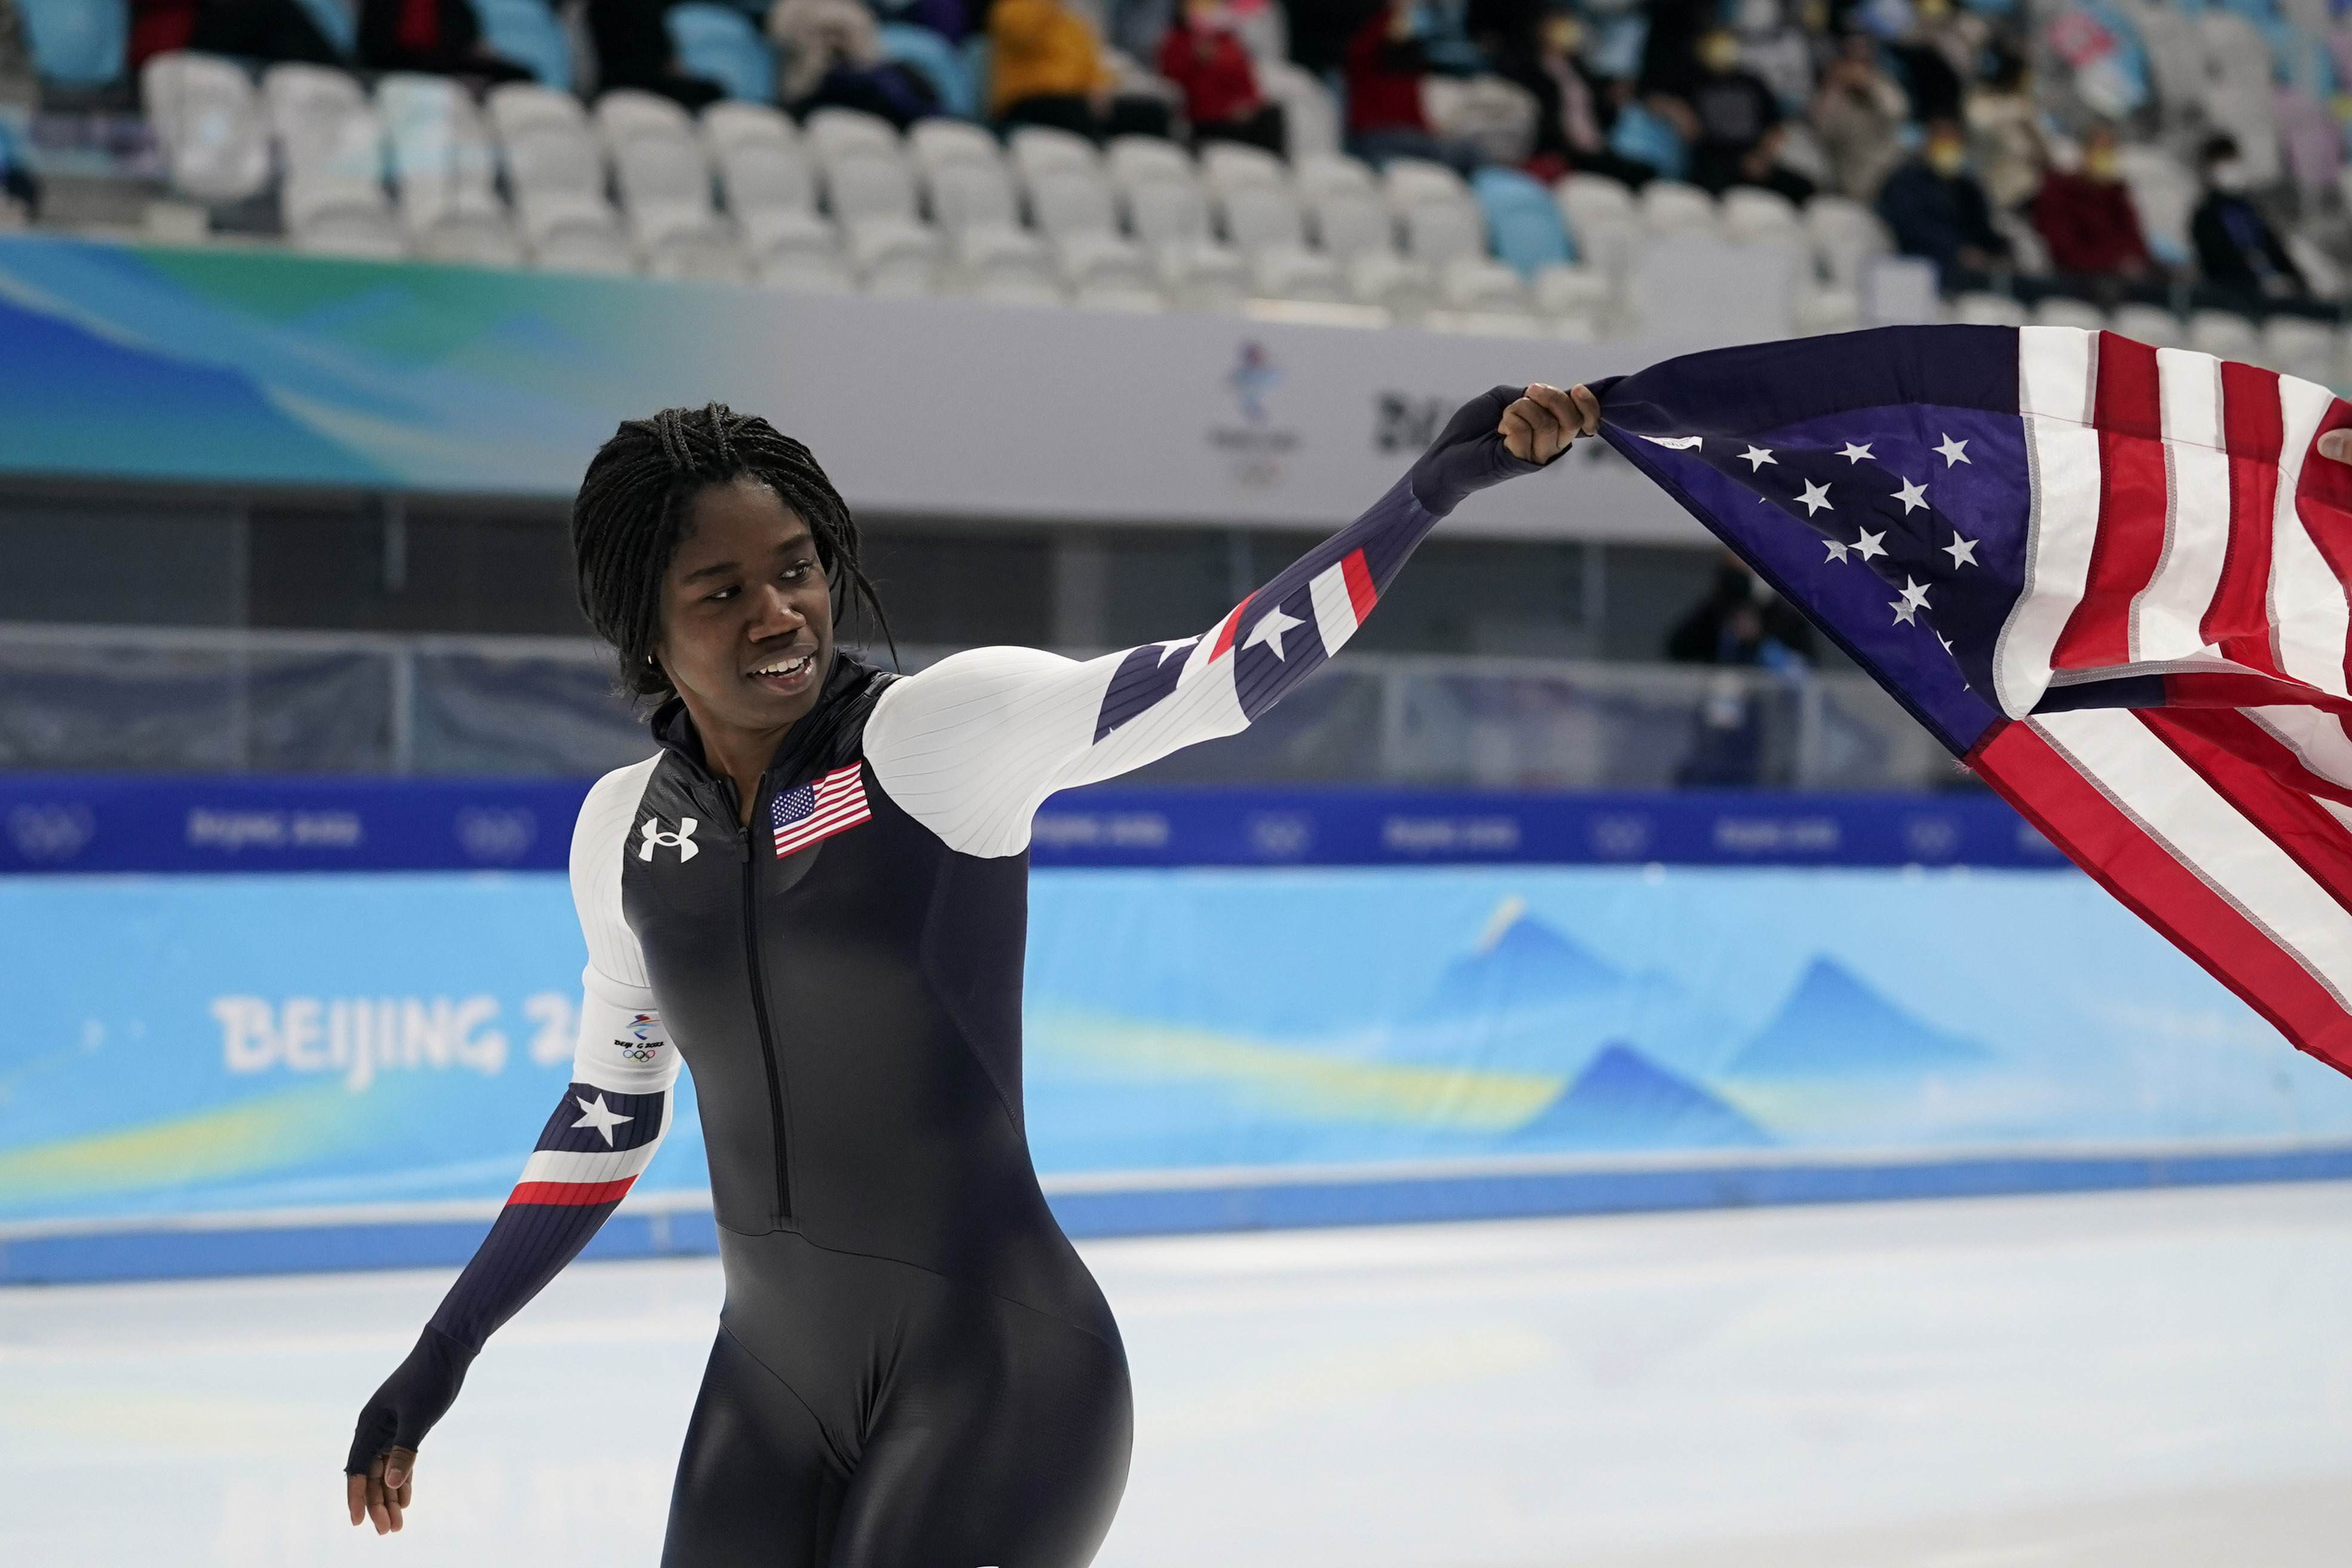 US Athlete Becomes First Black Woman to Win Individual Gold in Winter Games